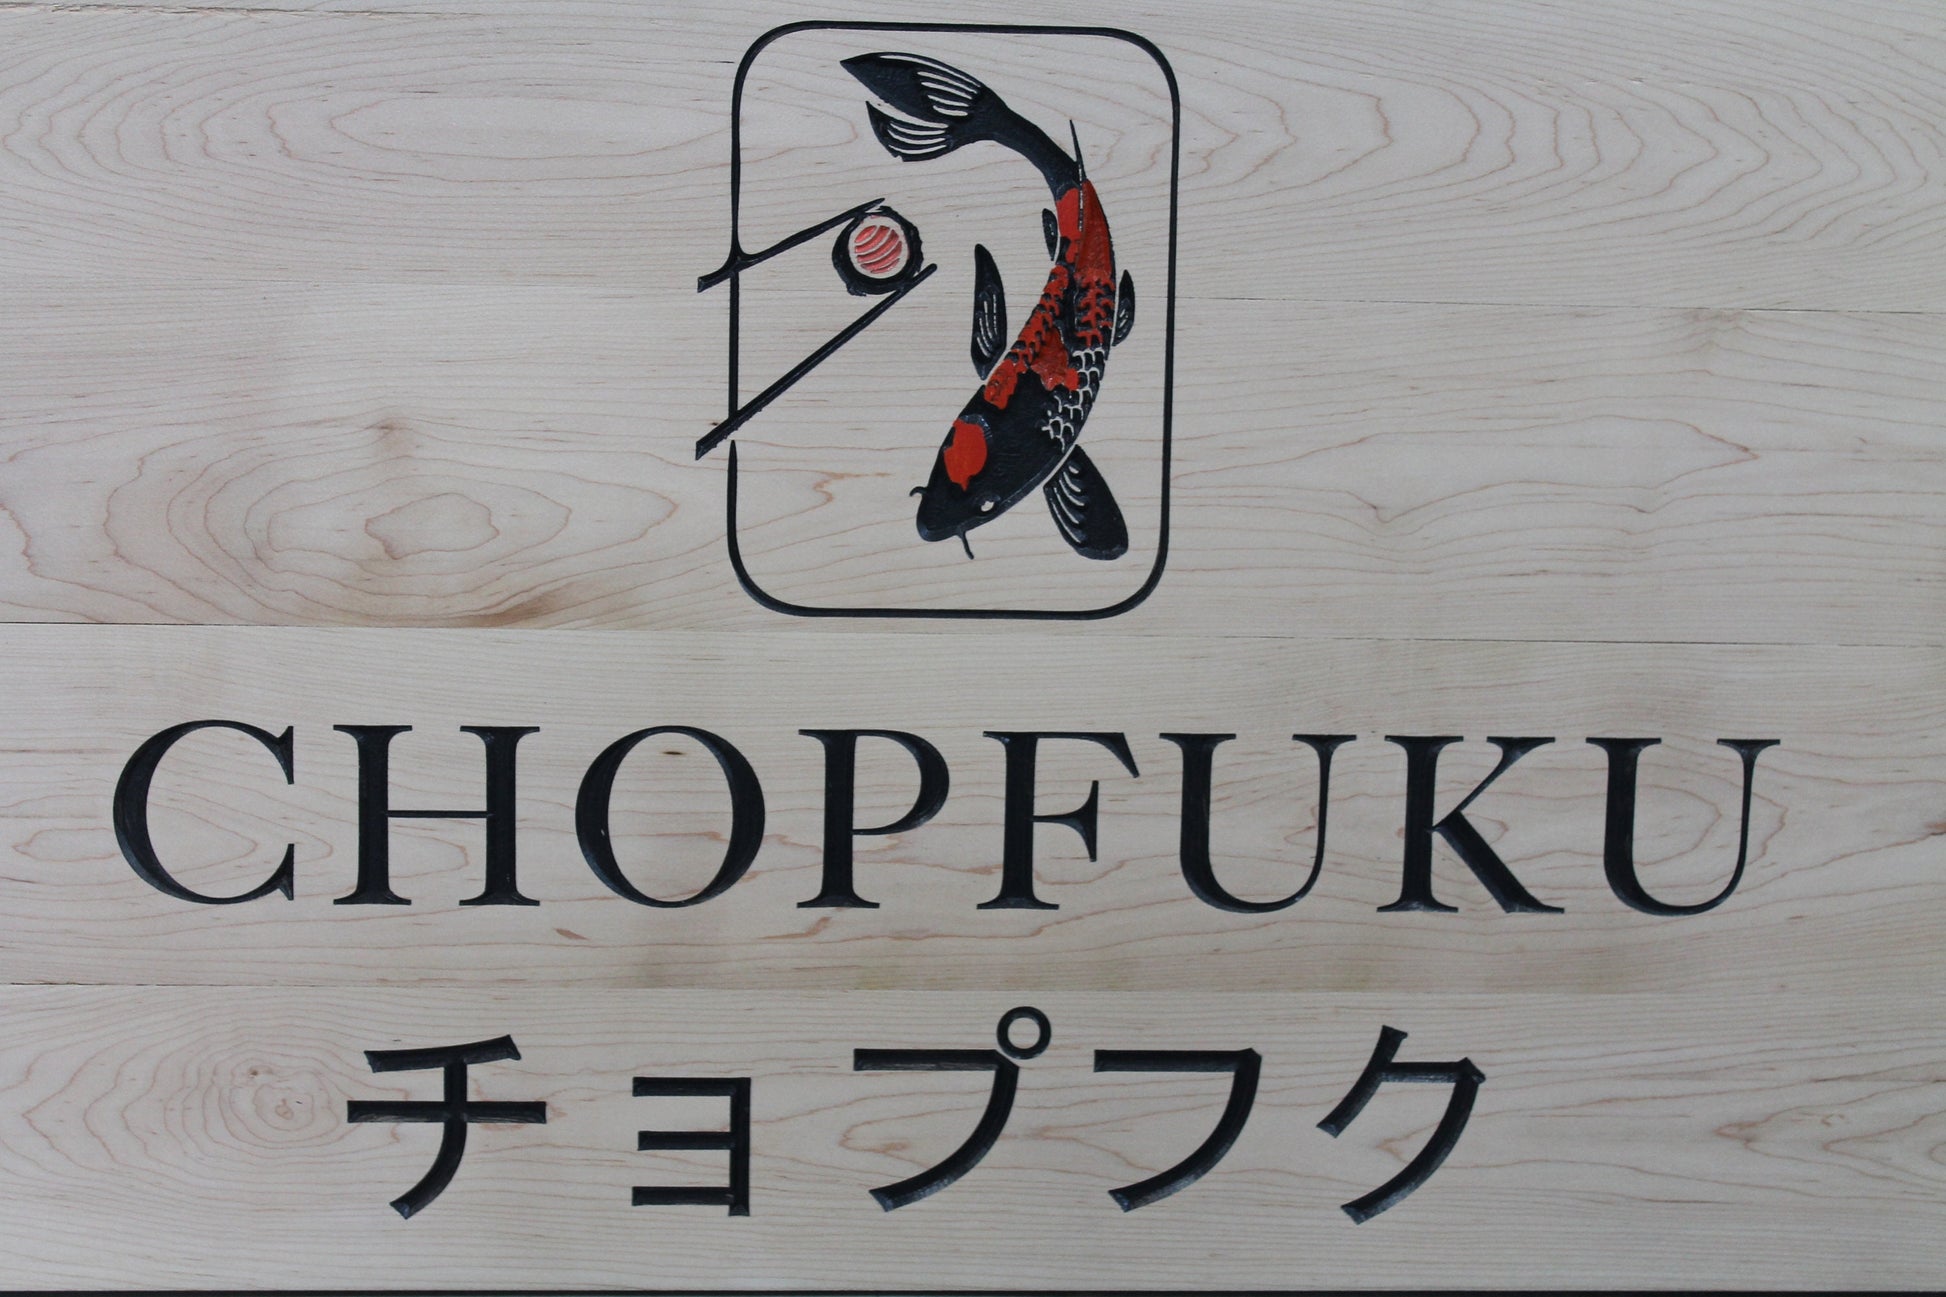 Koi Sushi Cuisine Engraved Color Filled Pine Rectangle Routed Japanese Inscribed Wooden Business Sign Restaurant Food